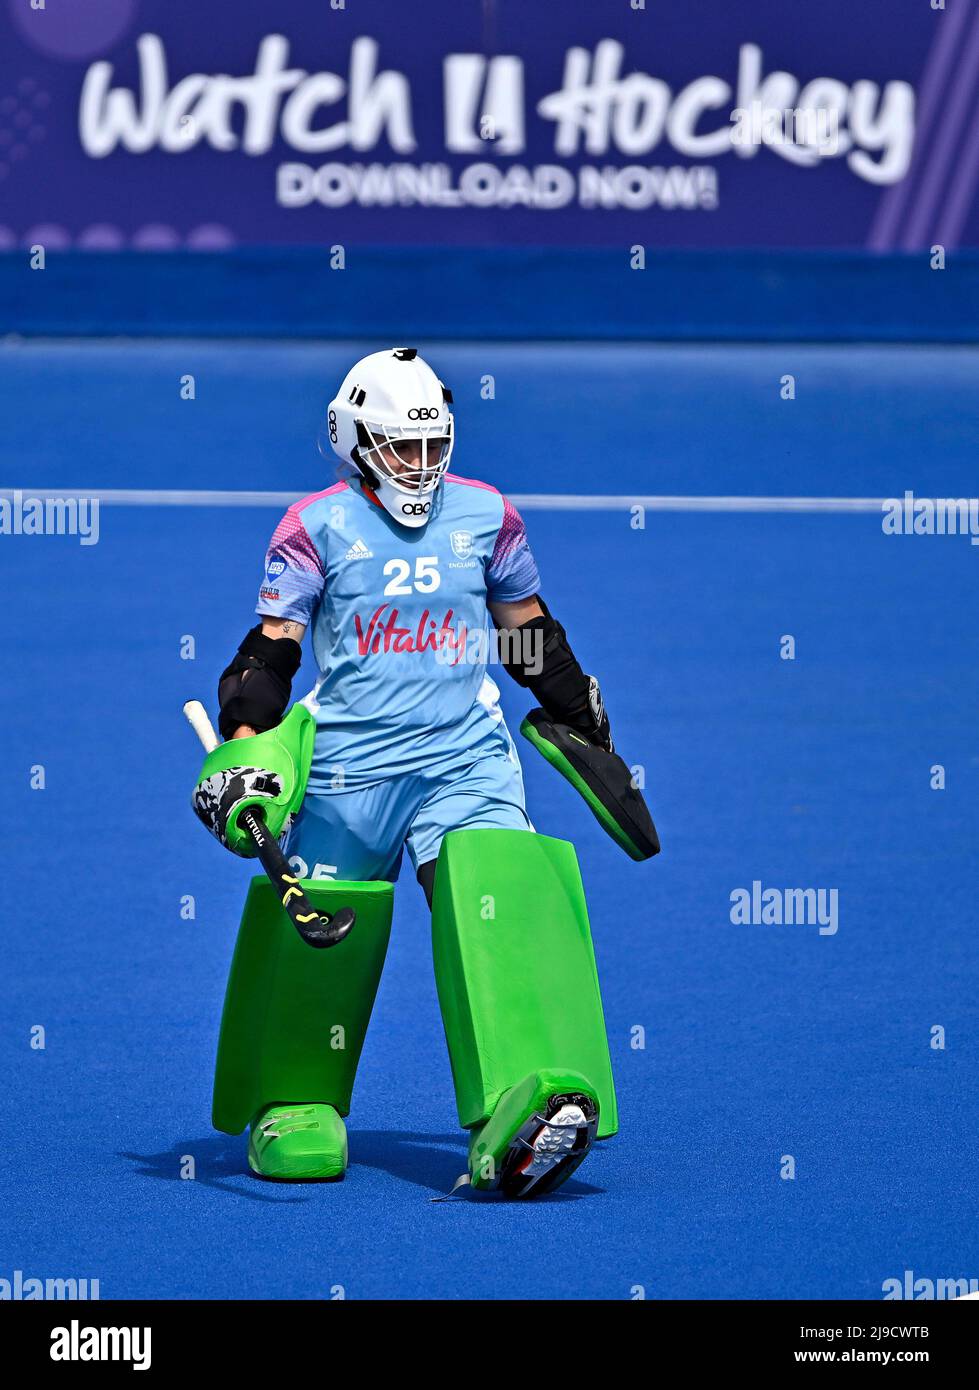 Stratford, United Kingdom. 22nd May, 2022. England V China Womens FIH Pro League. Lee Valley Hockey centre. Stratford. Sabbie Heesh (England, goalkeeper) during the England V China Womens FIH Pro League hockey match. Credit: Sport In Pictures/Alamy Live News Stock Photo